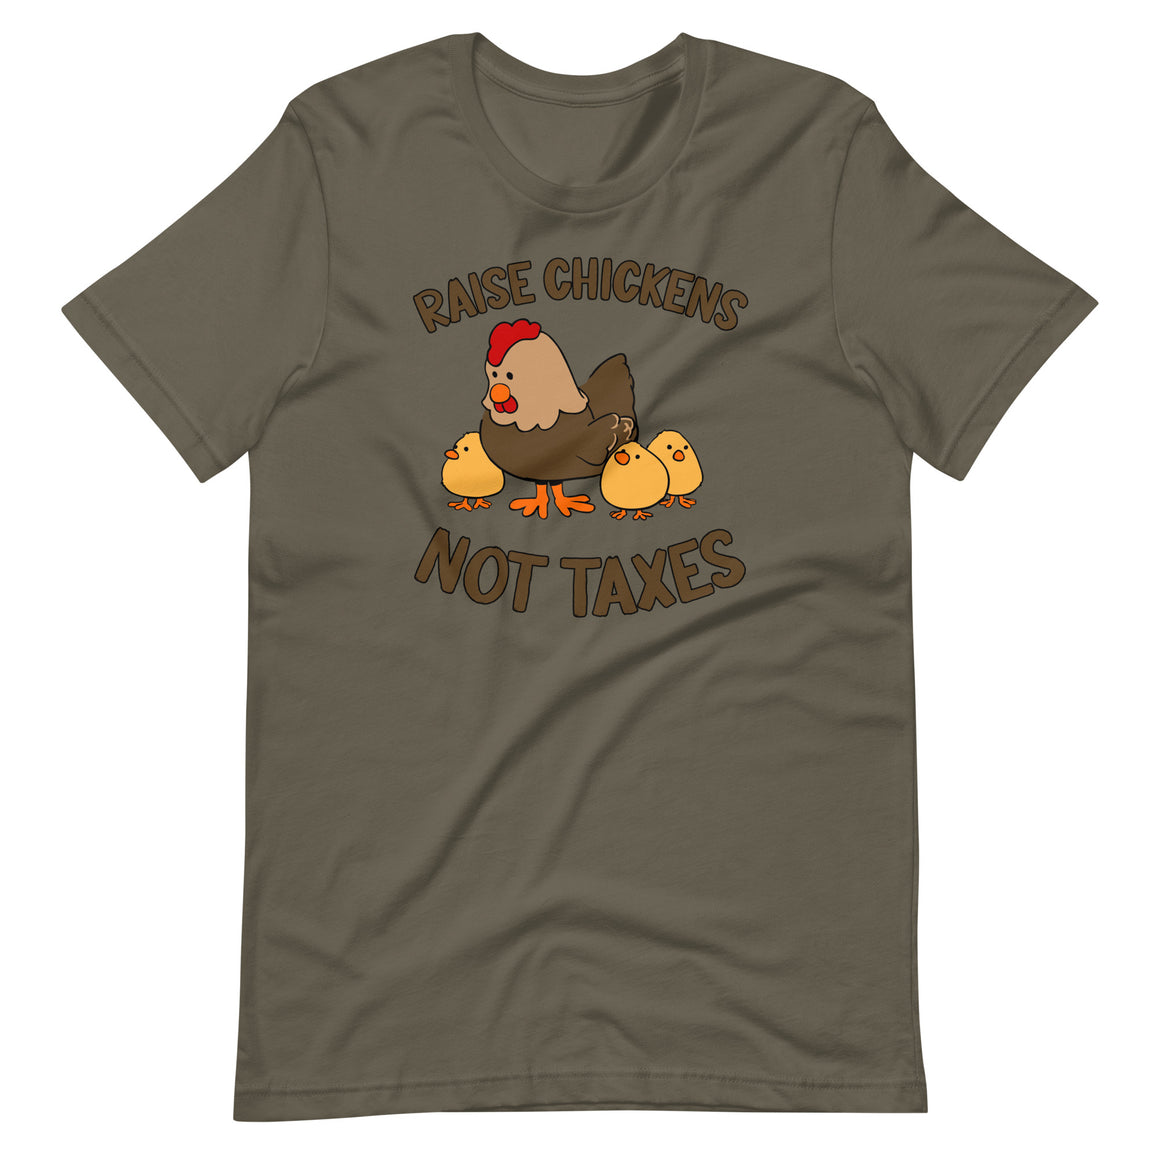 Raise Chickens Not Taxes Shirt by Libertarian Country